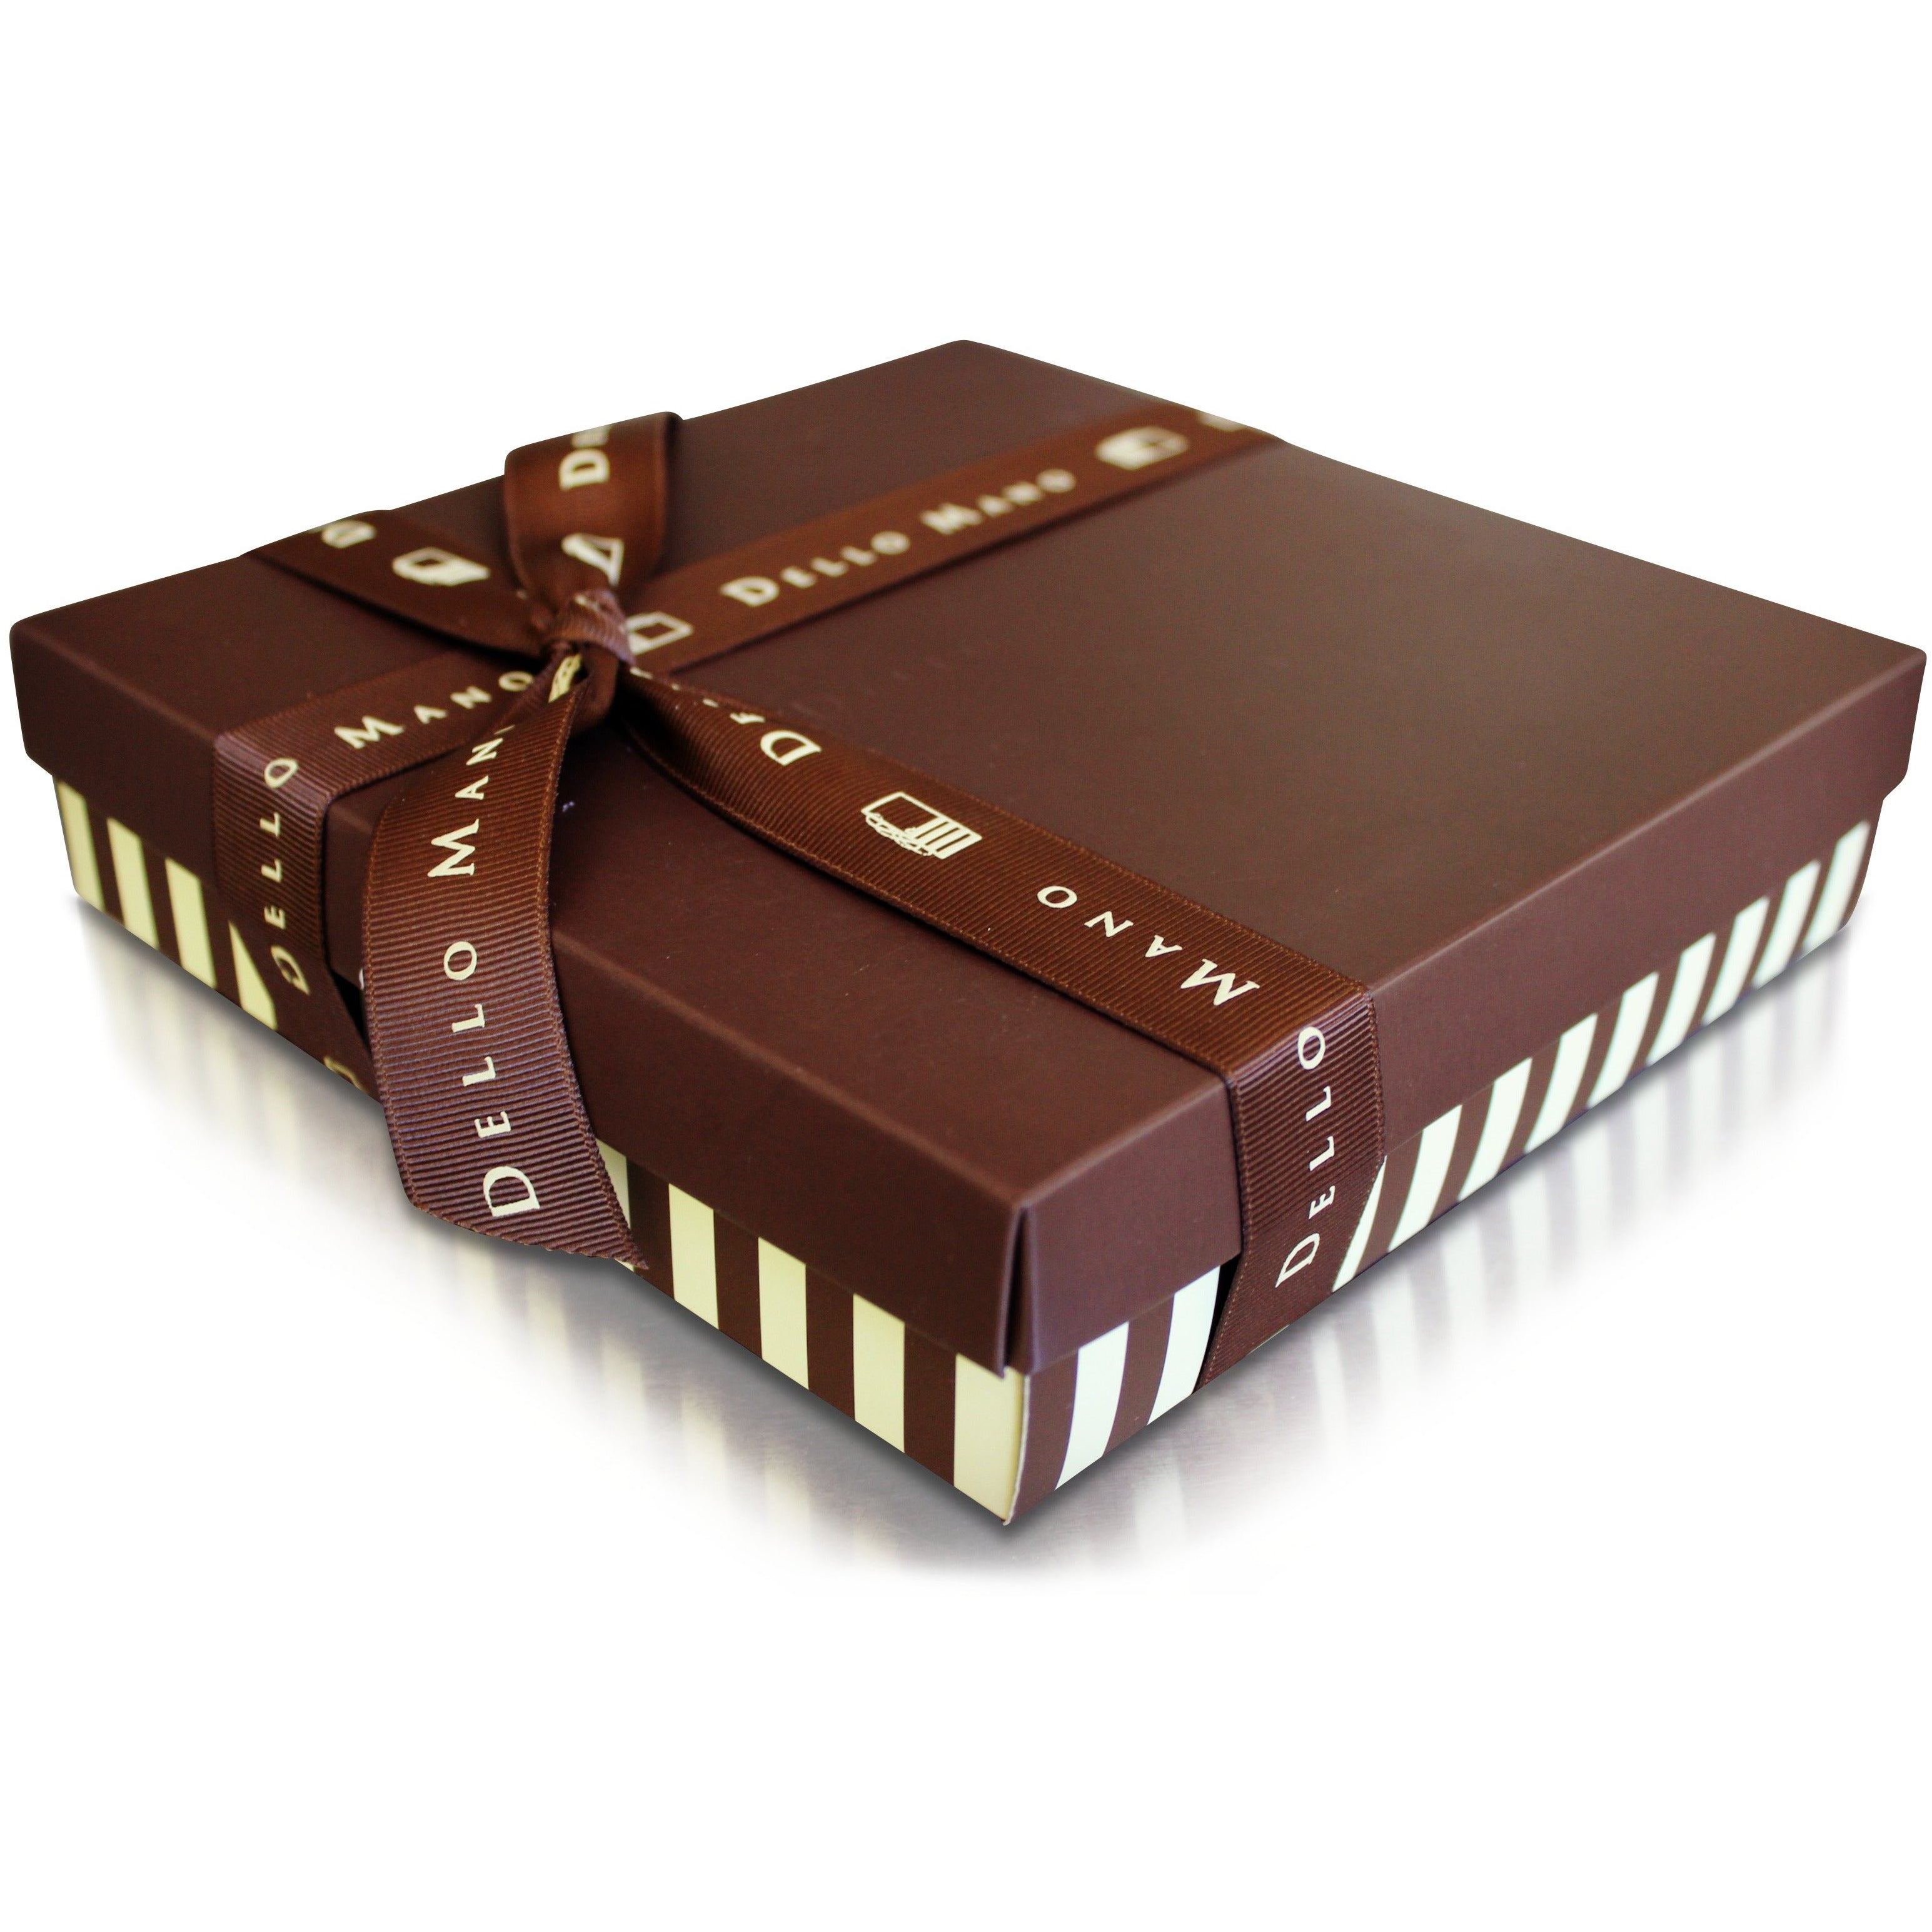 The Dello Mano Chocolate Brownie Gift Box is a beautifully presented brown and cream striped box finished with and gross grain ribbon embroidered with Dello Mano logo. 